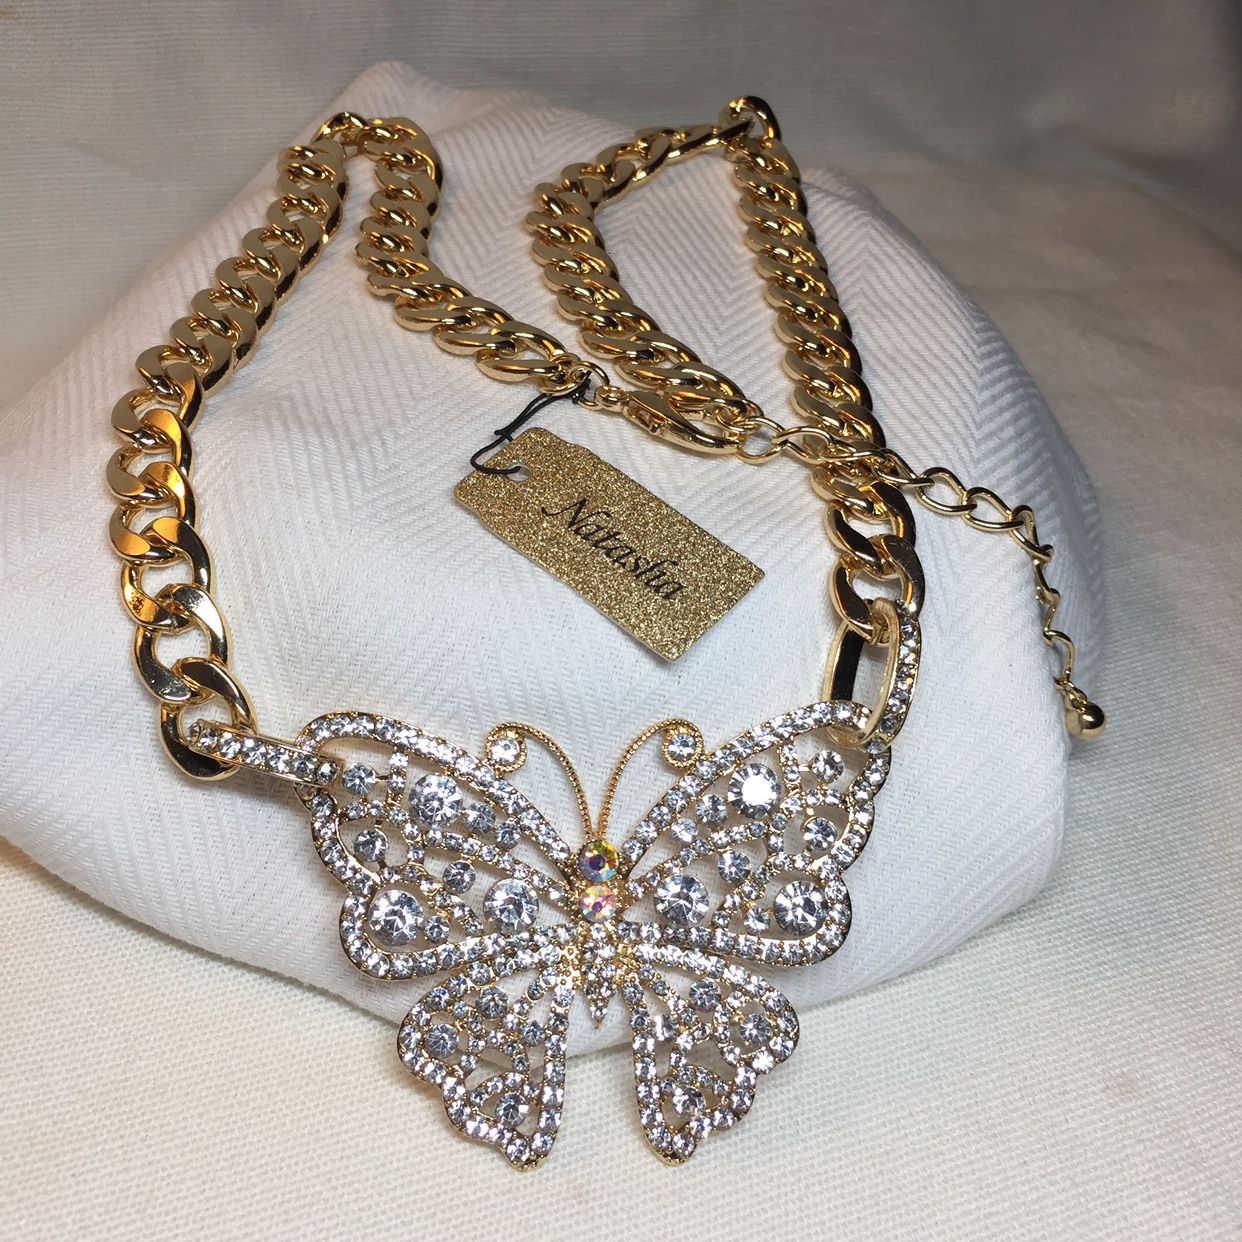 Designer Natasha, Sparkling Rhinestone Butterfly Chunky Chain Necklace *New With Tag 